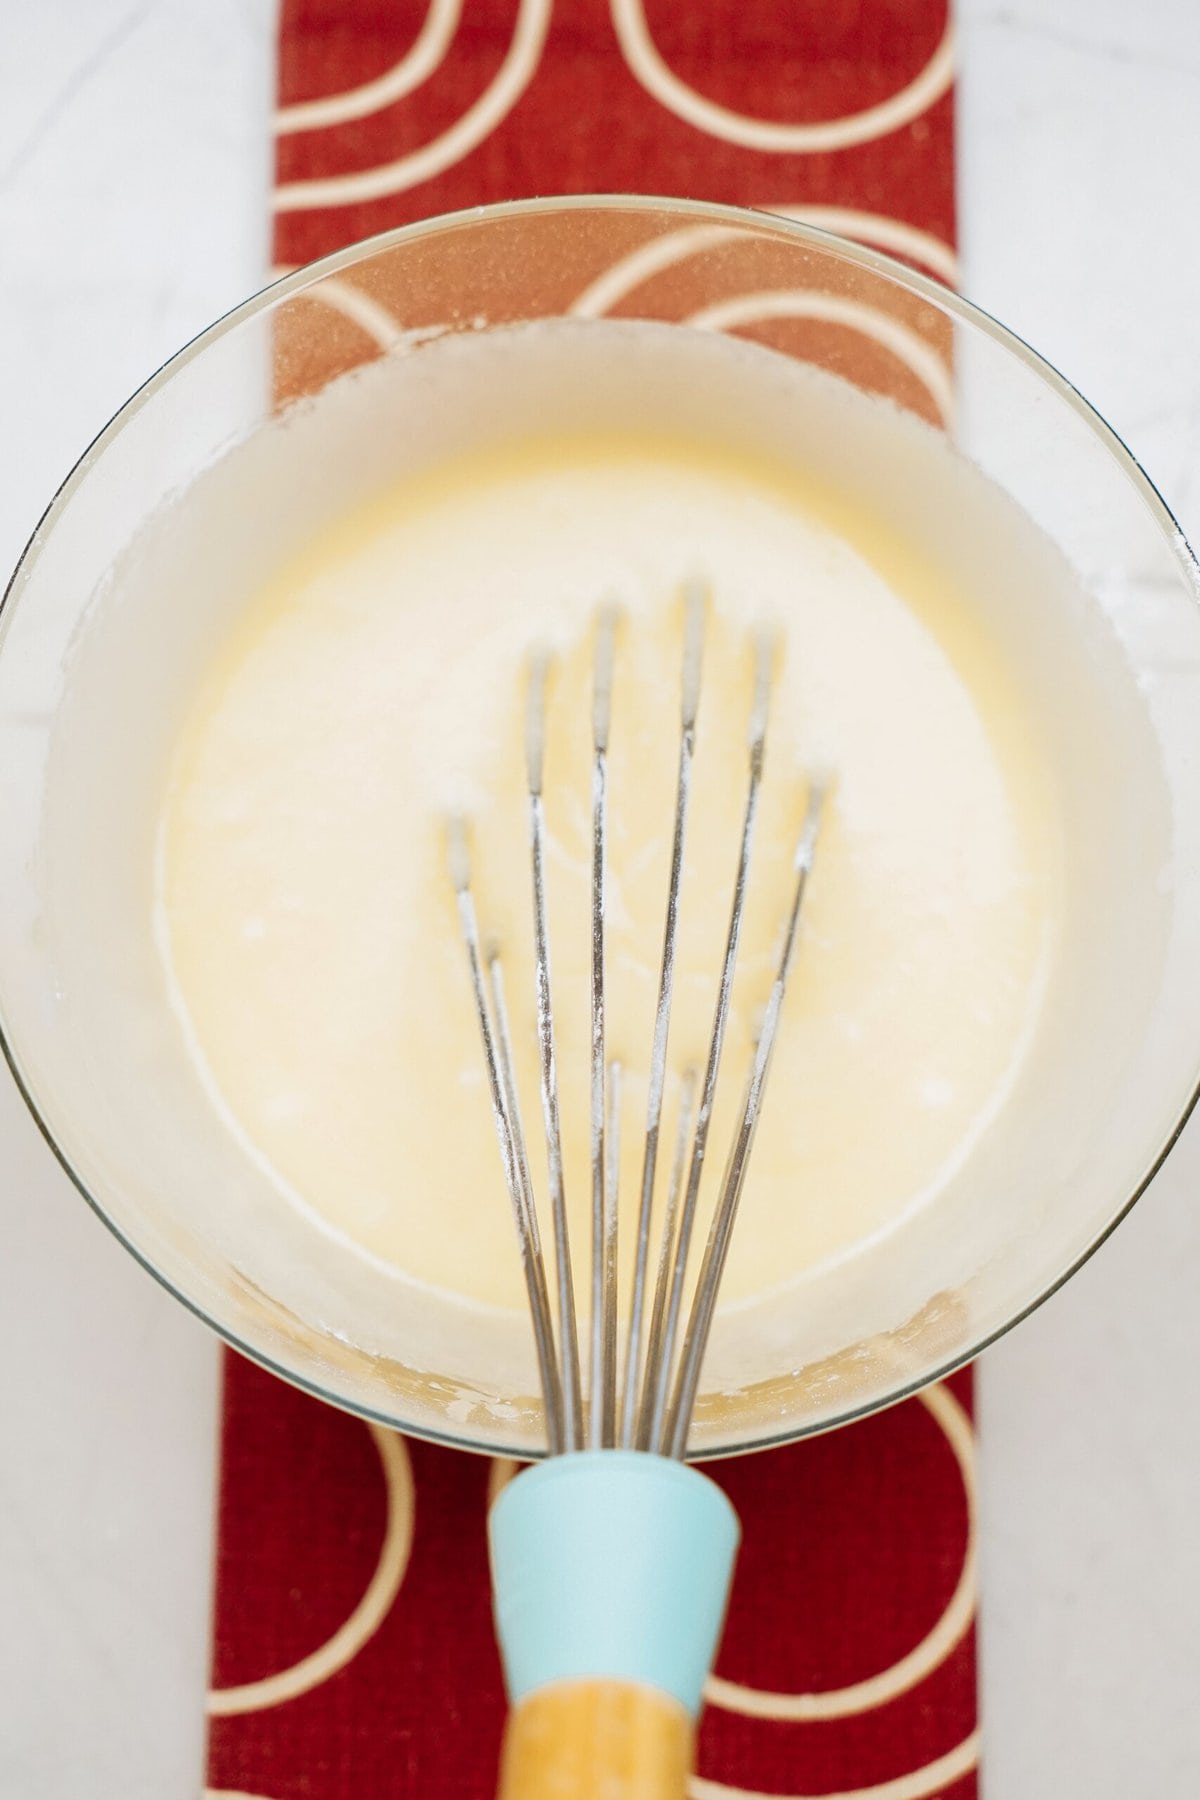 A whisk rests in a bowl of smooth, light yellow batter, reminiscent of the beginnings of delicious cinnamon rolls, placed on a red and white patterned surface.